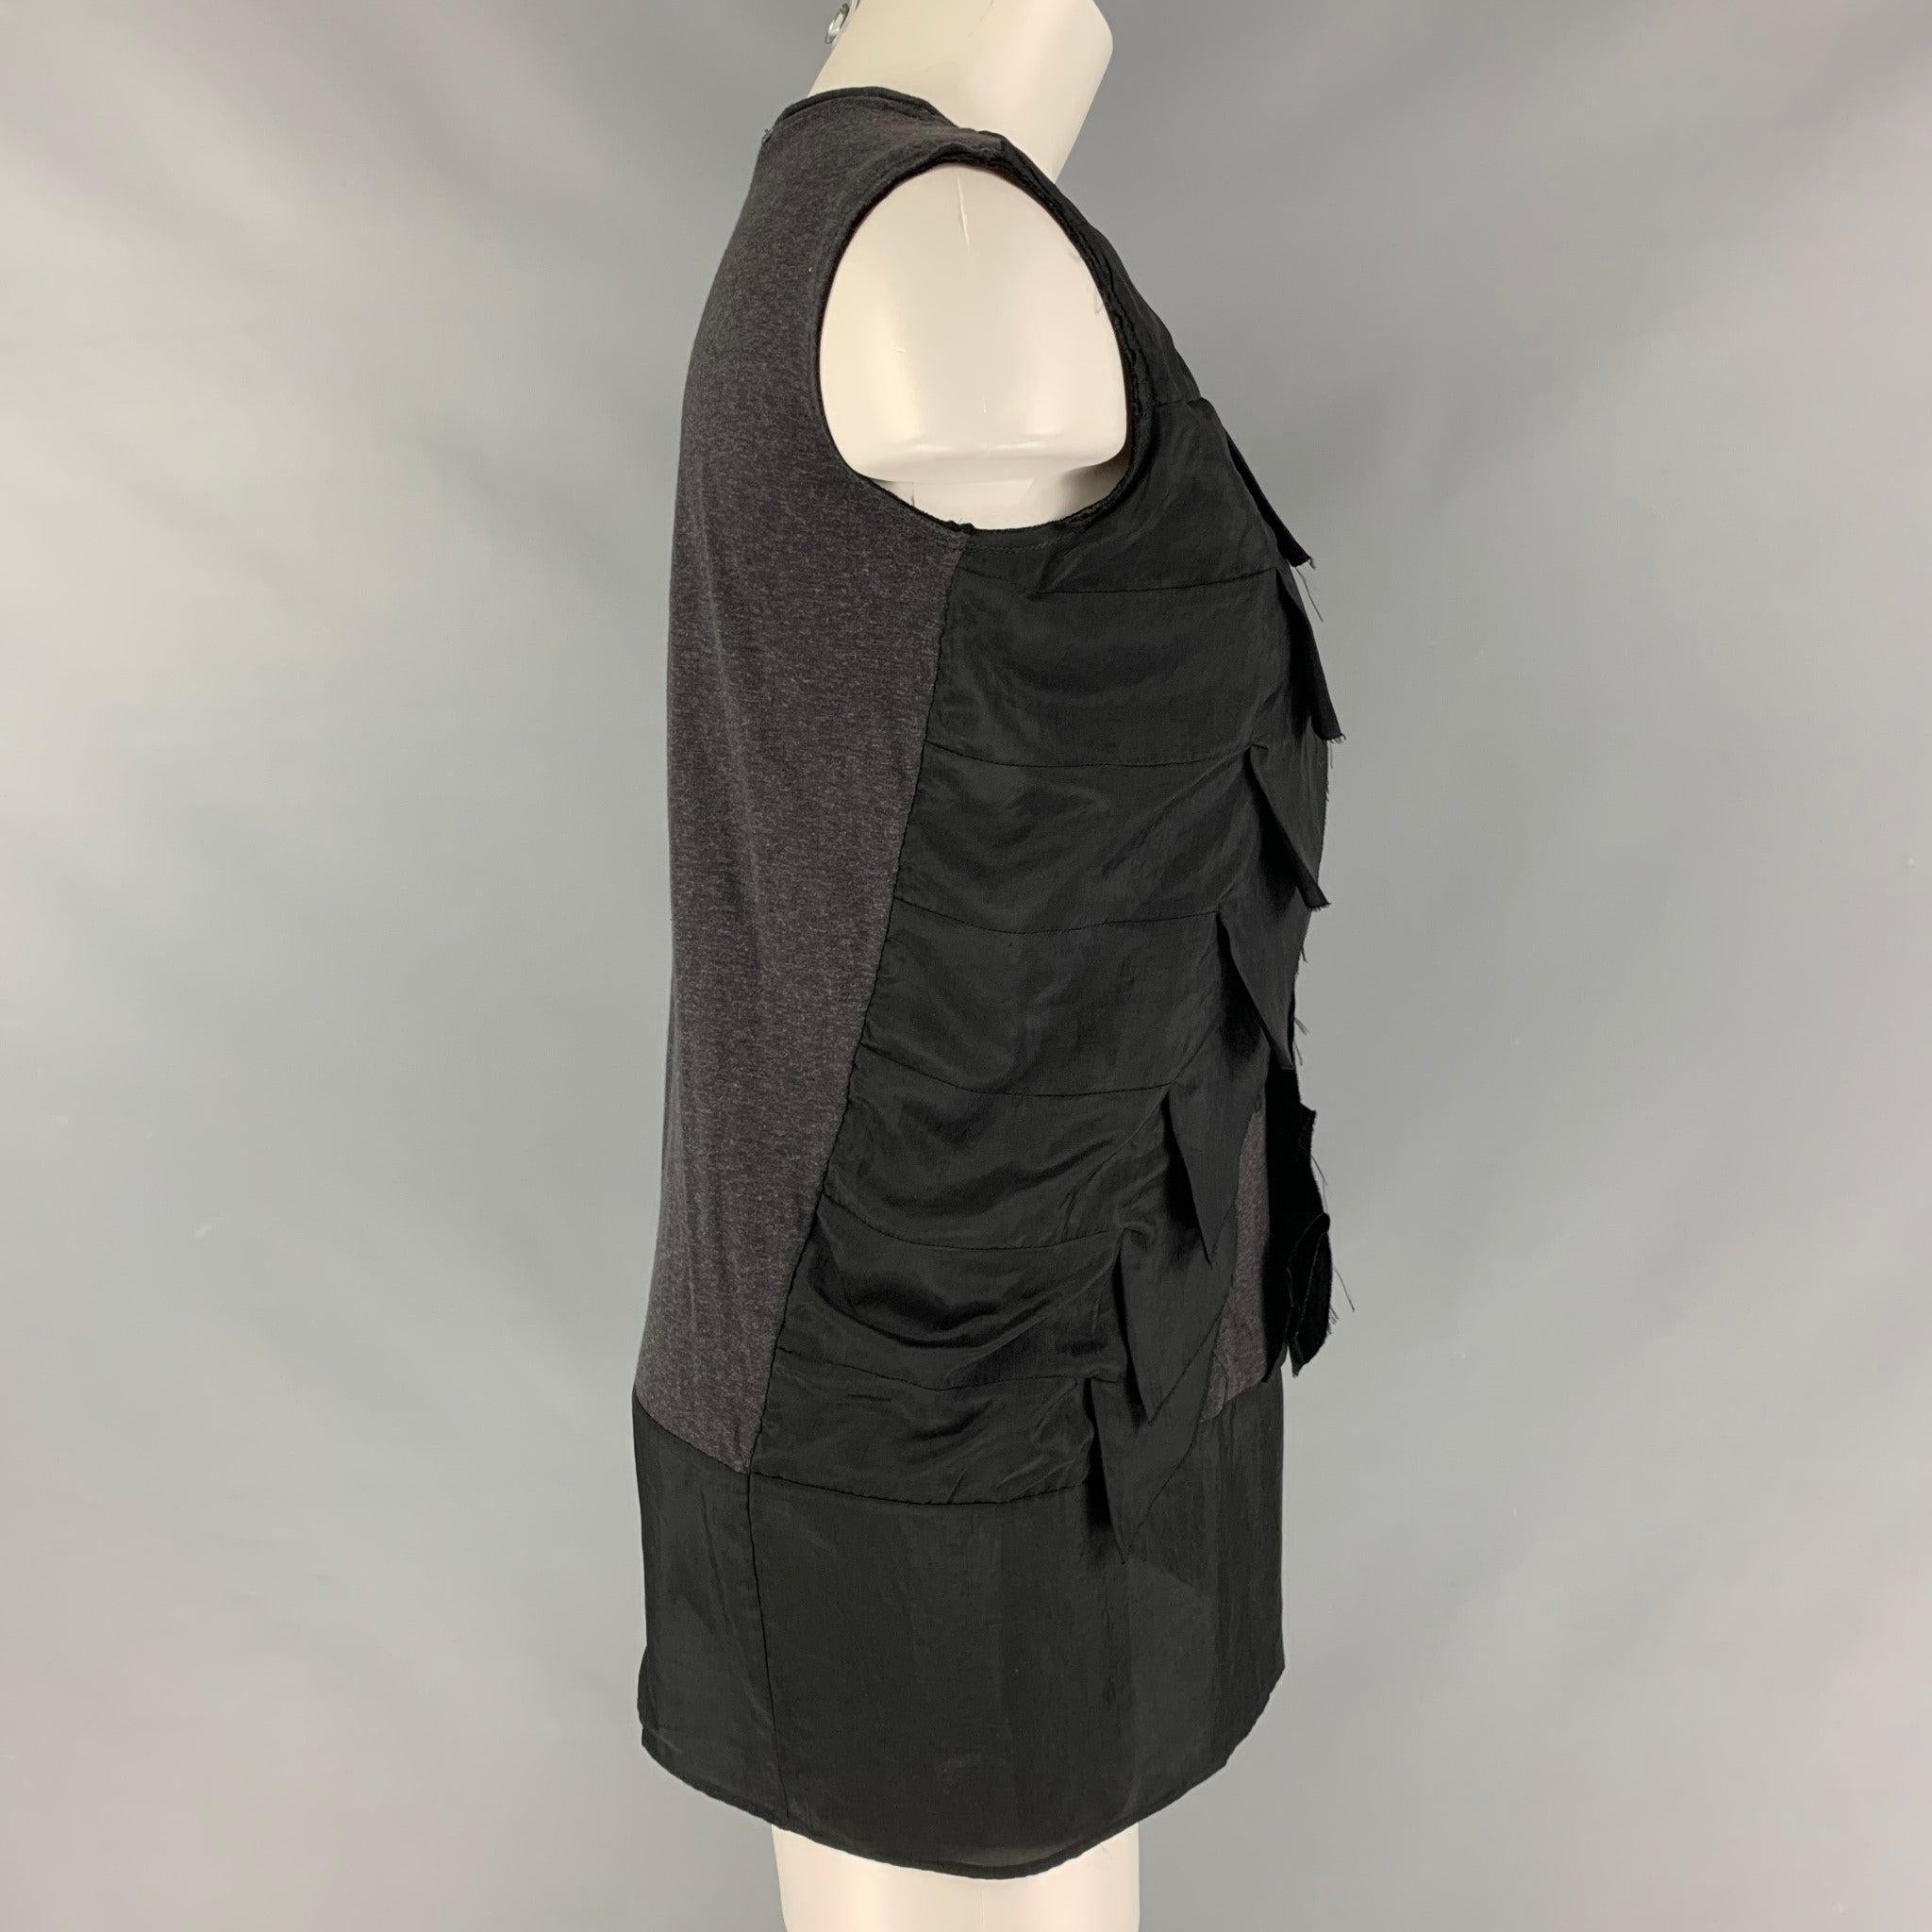 MARNI sleeveless blouse comes in a black triacetate jersey featuring a ruffled front detail. Made in Italy.Very Good Pre-Owned Condition. Minor mark at front. 

Marked:   38 

Measurements: 
 
Shoulder: 15.5 inches Bust: 37 inches Length: 27 inches 